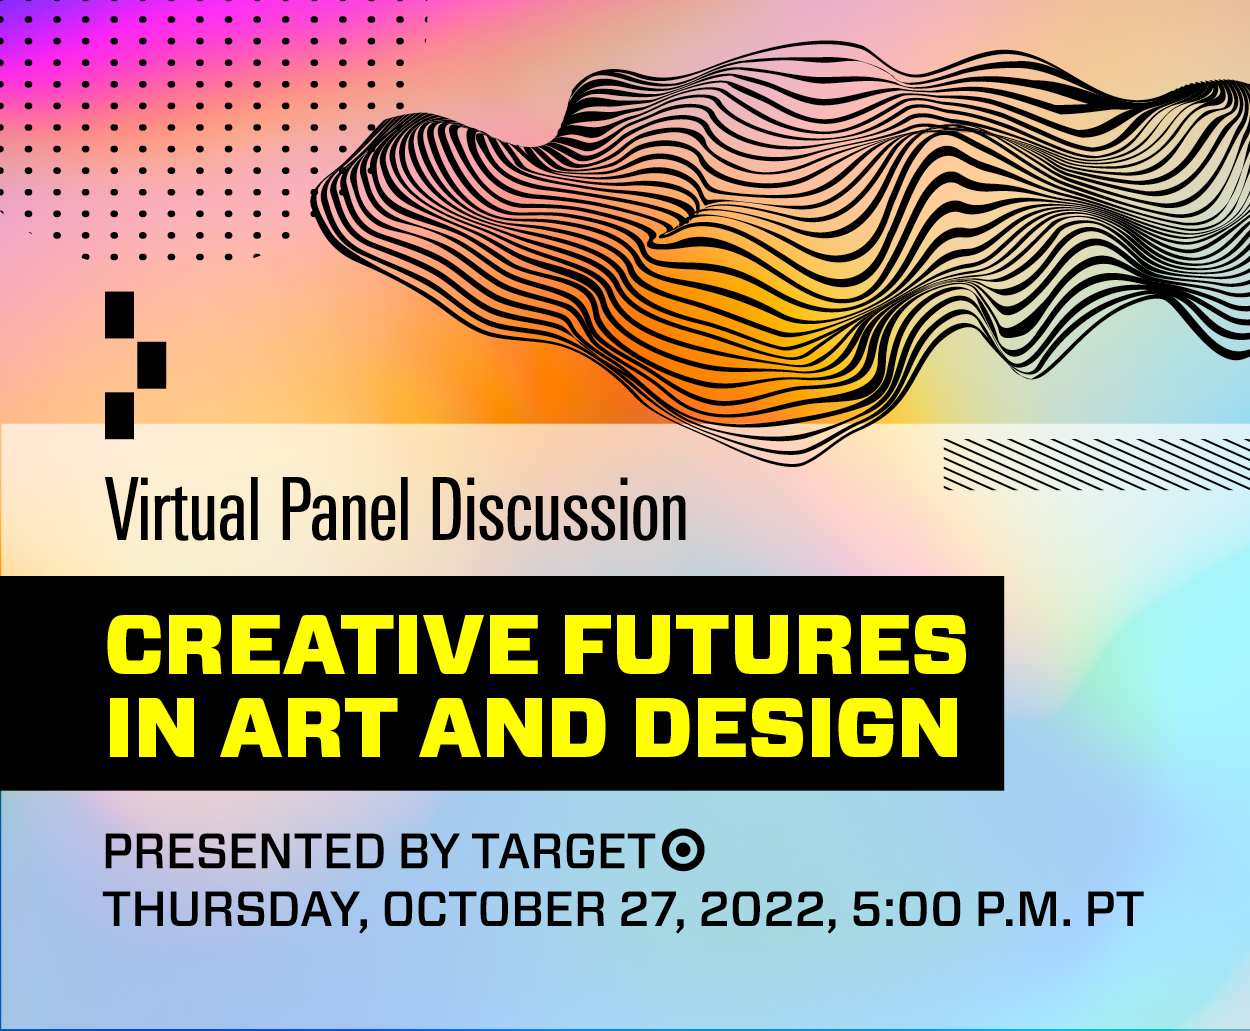 Creative Futures in Art and Design Panel Discussion Presented by Target poster